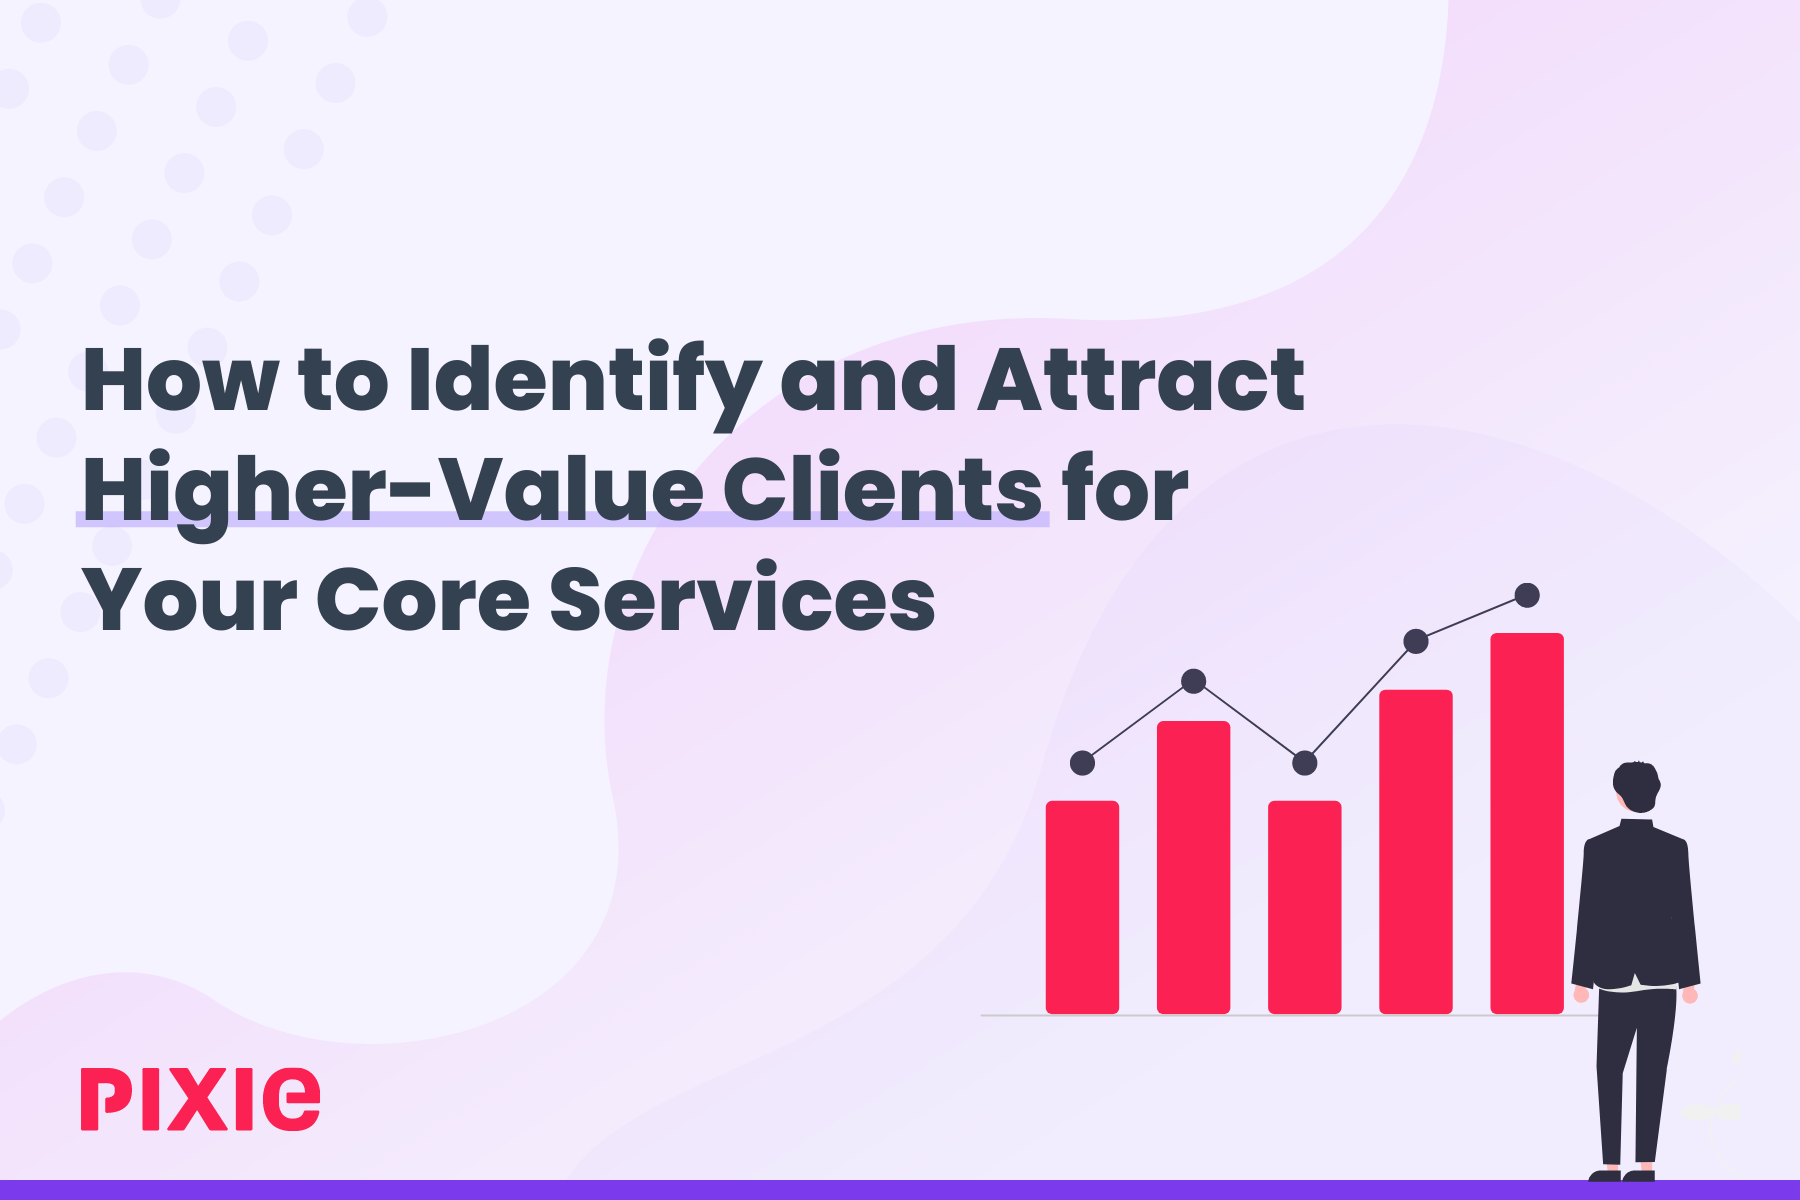 How to Identify and Attract Higher-Value Clients for Your Core Services